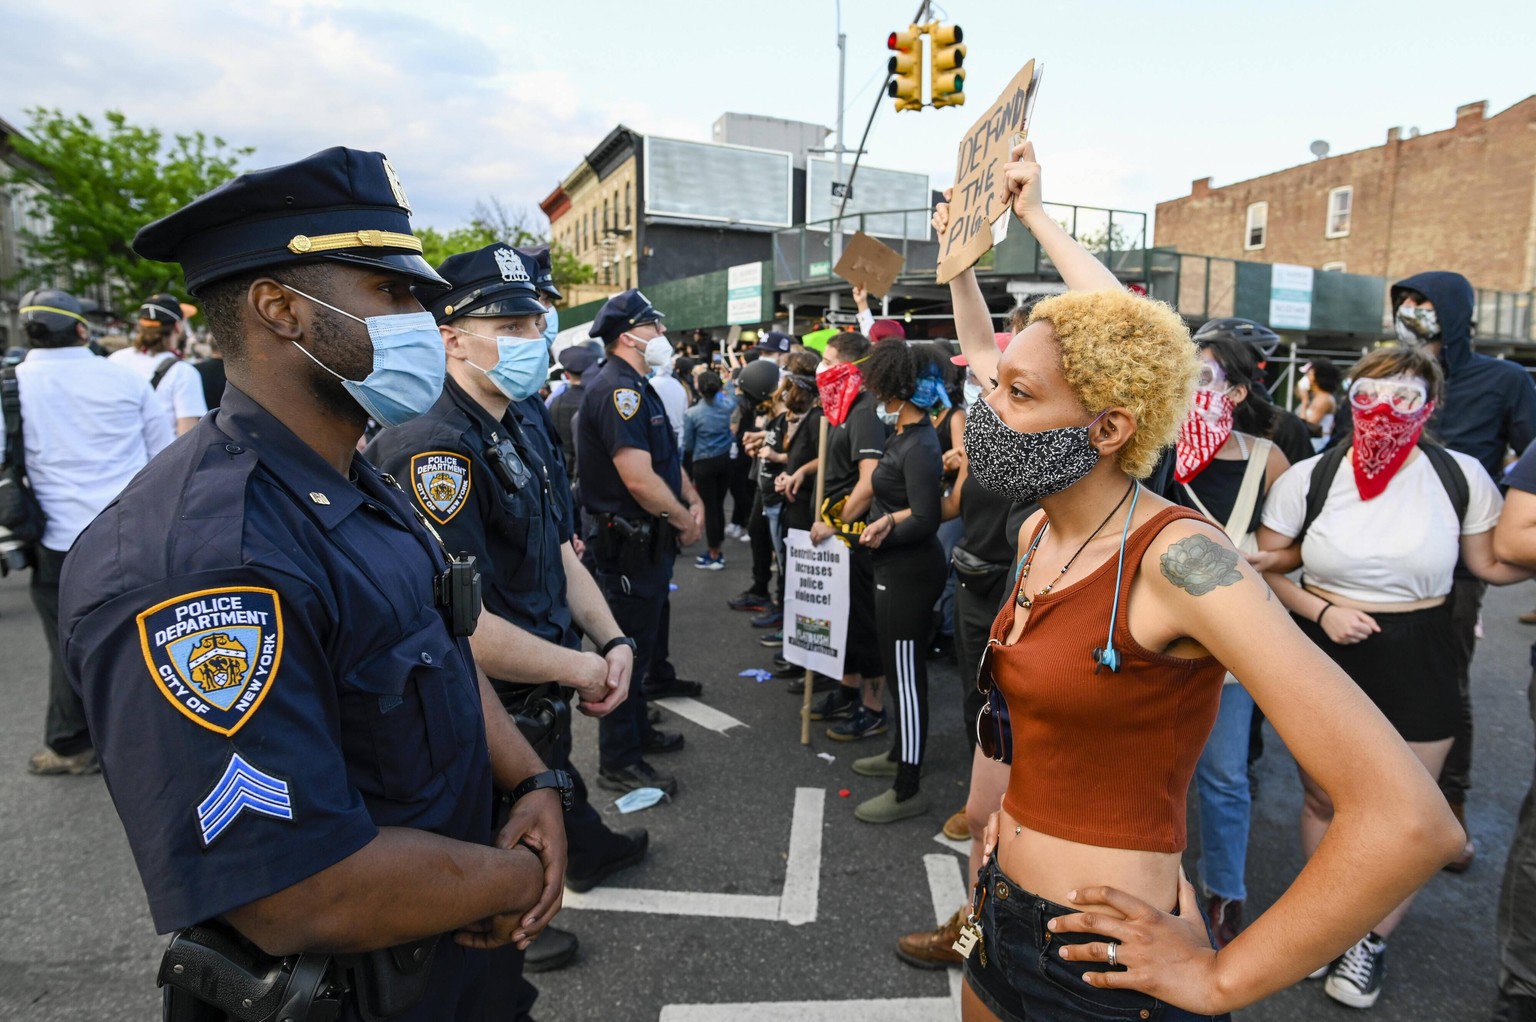 A protester faces police when Black Lives Matter protesters clash with NYPD officers as protests continue over the death of George Floyd at the hands of the Minneapolis police, in New York City on Sat ...